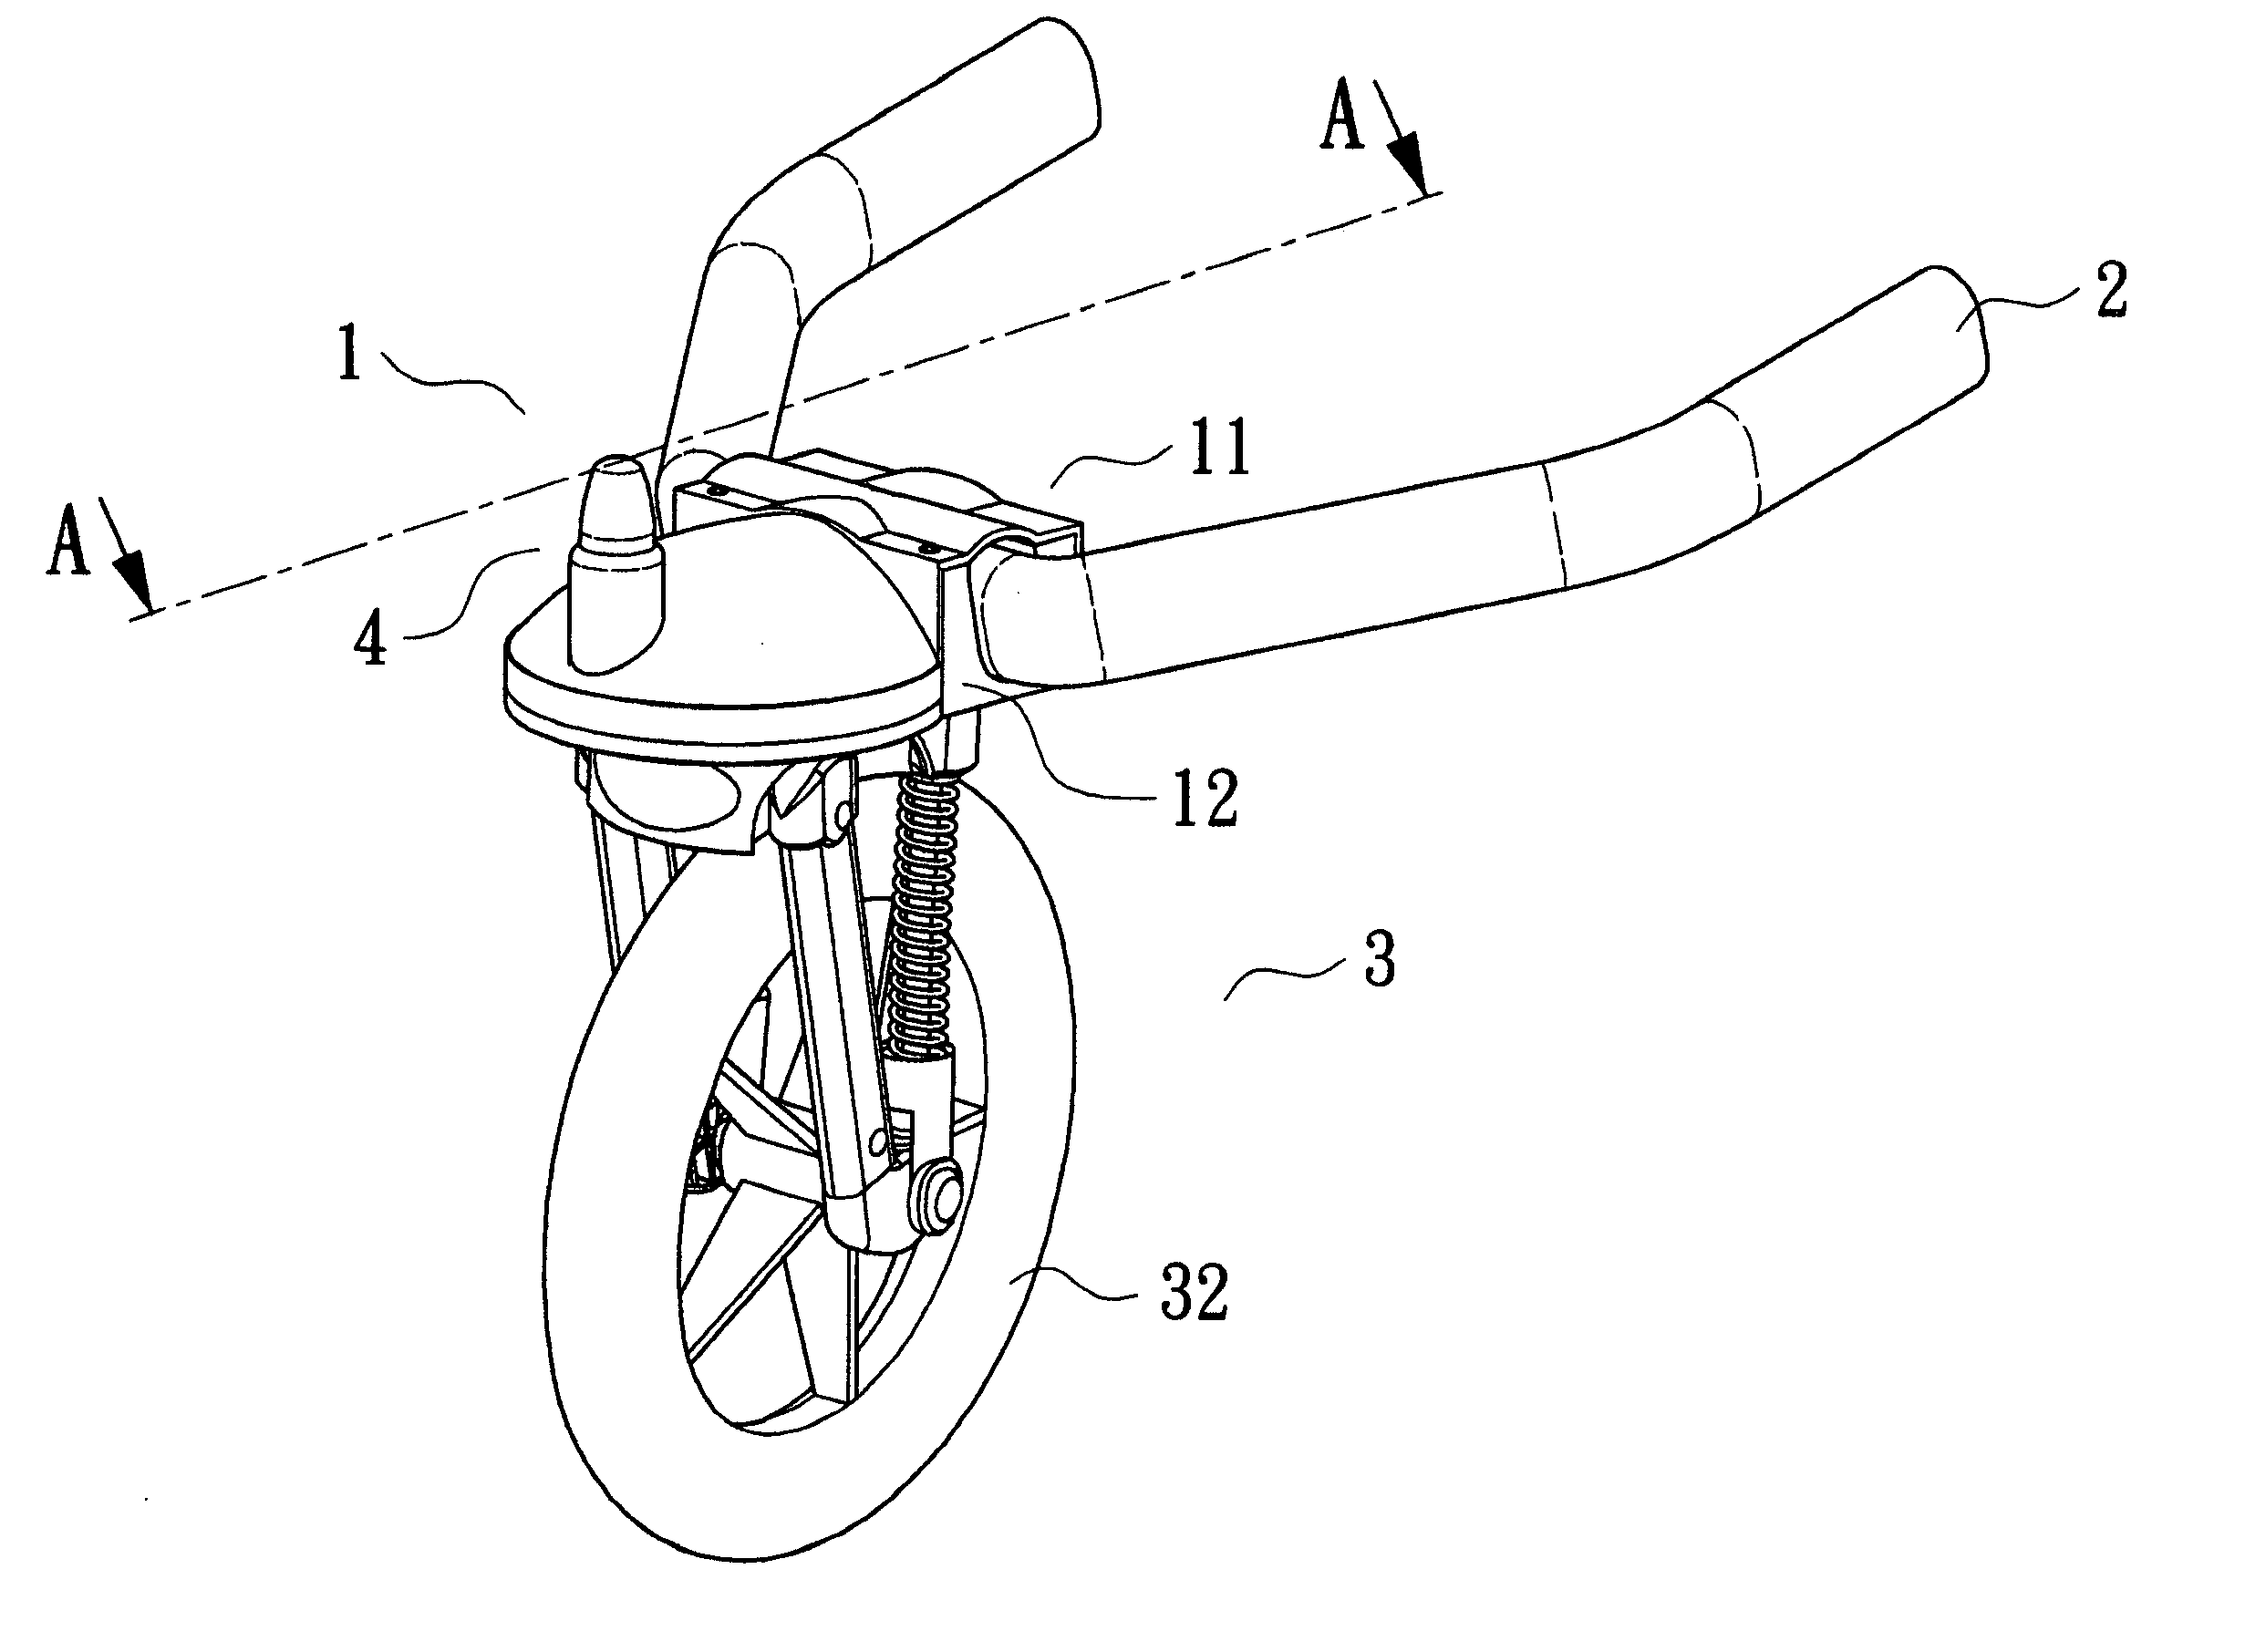 Direction-limiting device for stroller